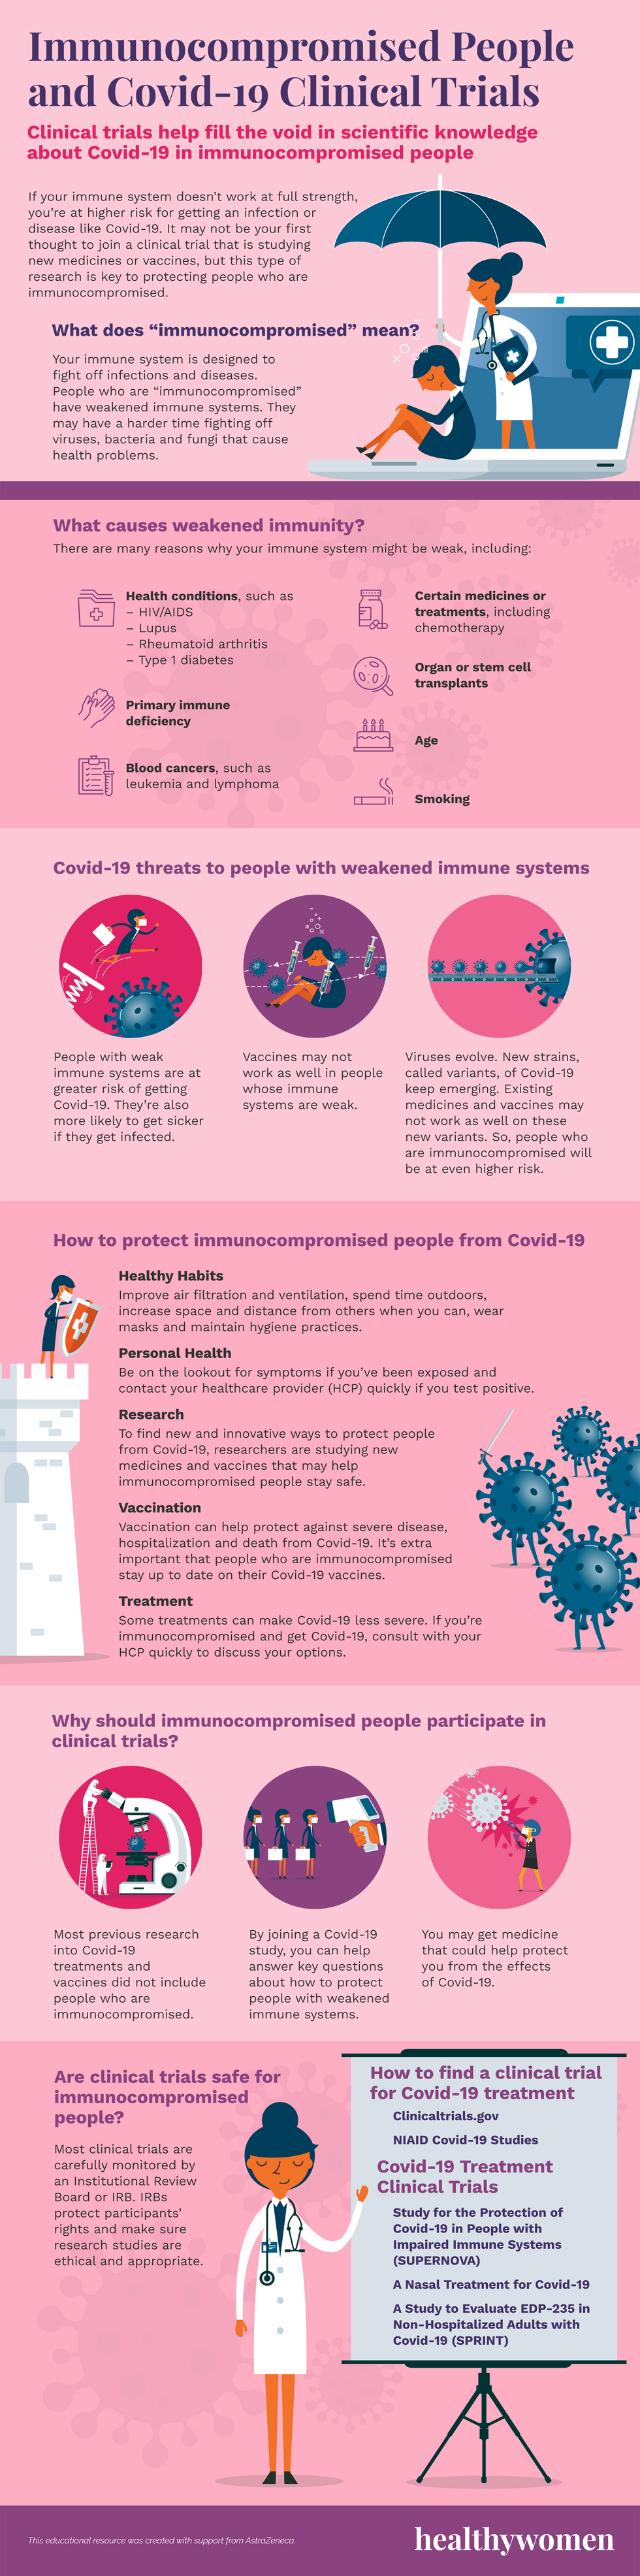 Immunocompromised People and Covid-19 Clinical Trials infographic. Click image to view PDF.